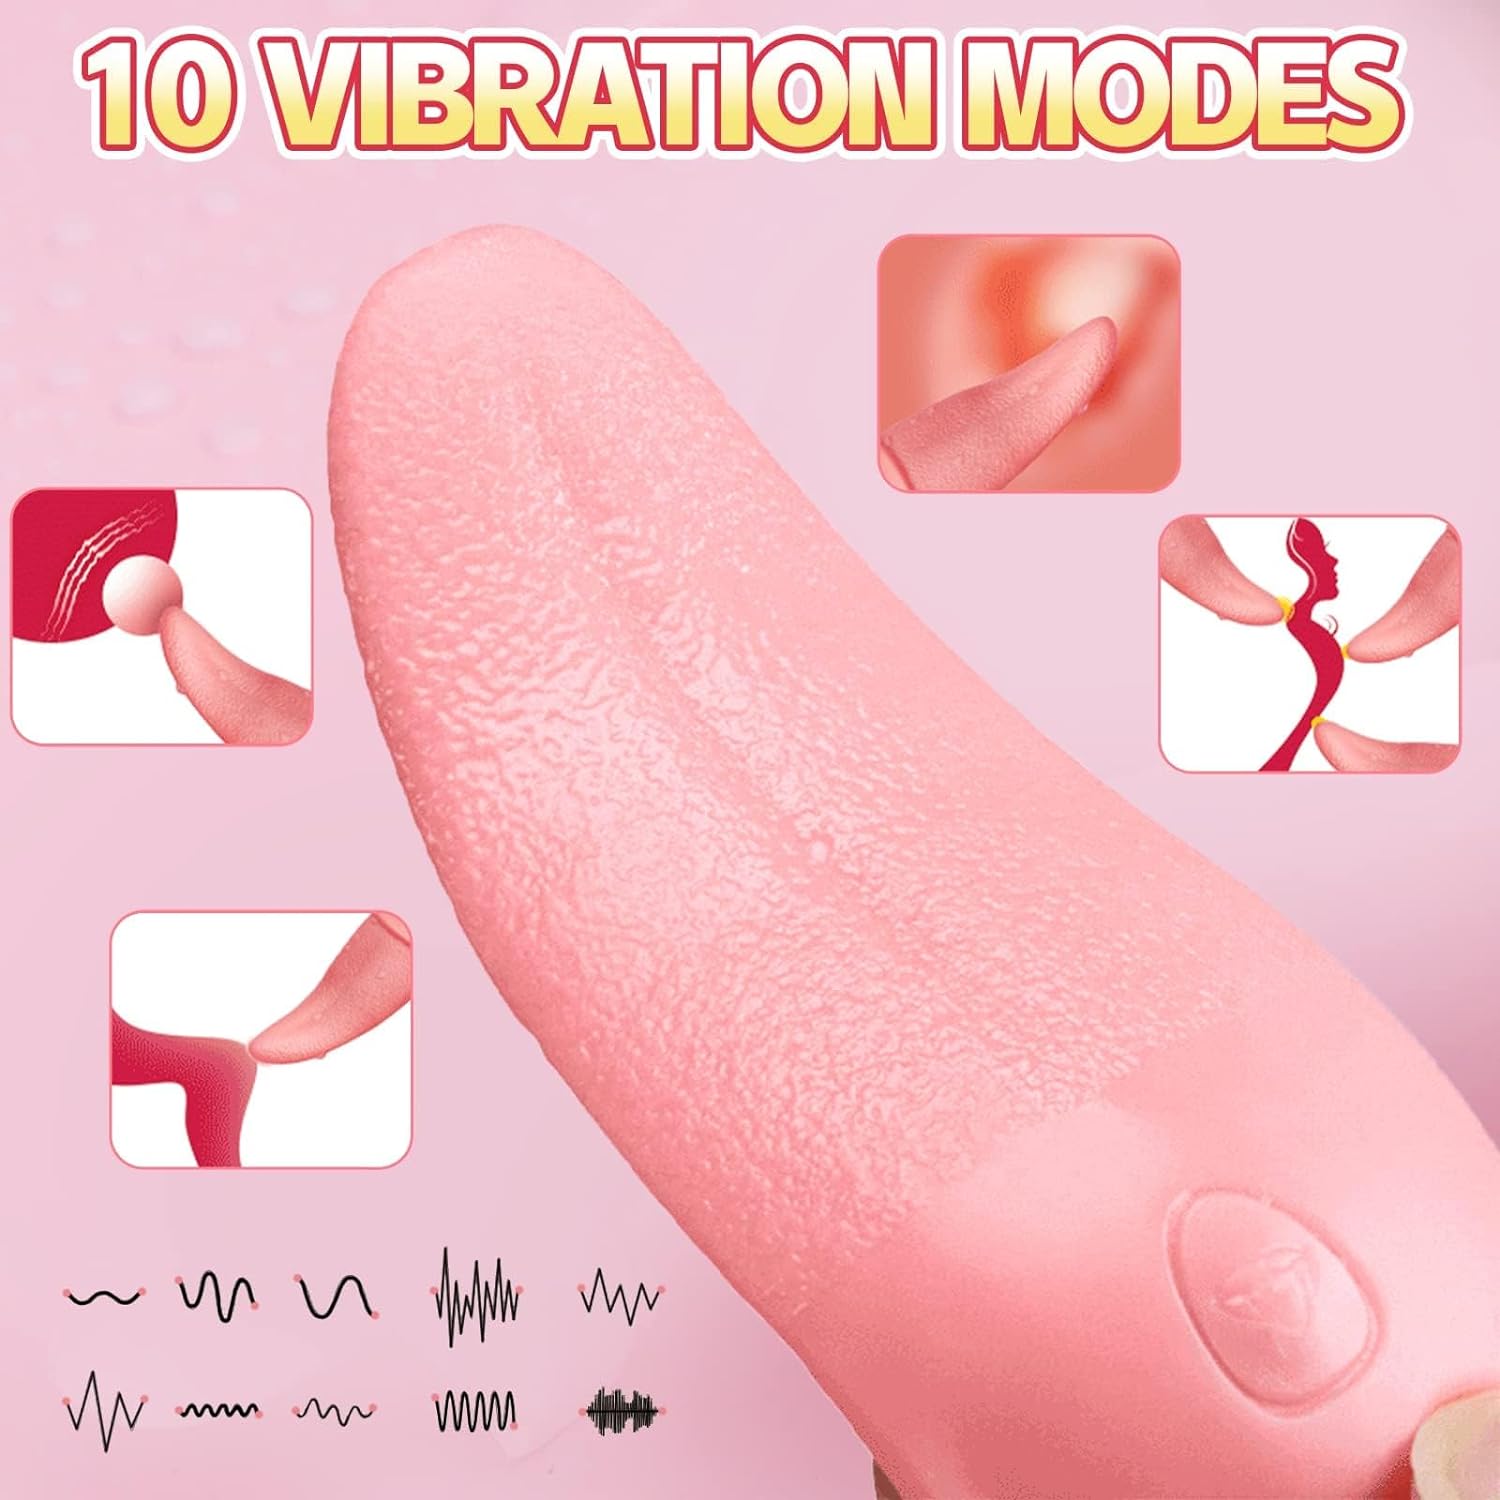 Clitoral Licking Vibrator, Heated Tongue Vibrator with 10 Vibration Modes, Tongue Toy for Women G Spot Clitoral Stimulator Nipple Toys, Vaginal Anal Breast Vibrator Adult Toys for Women Couple